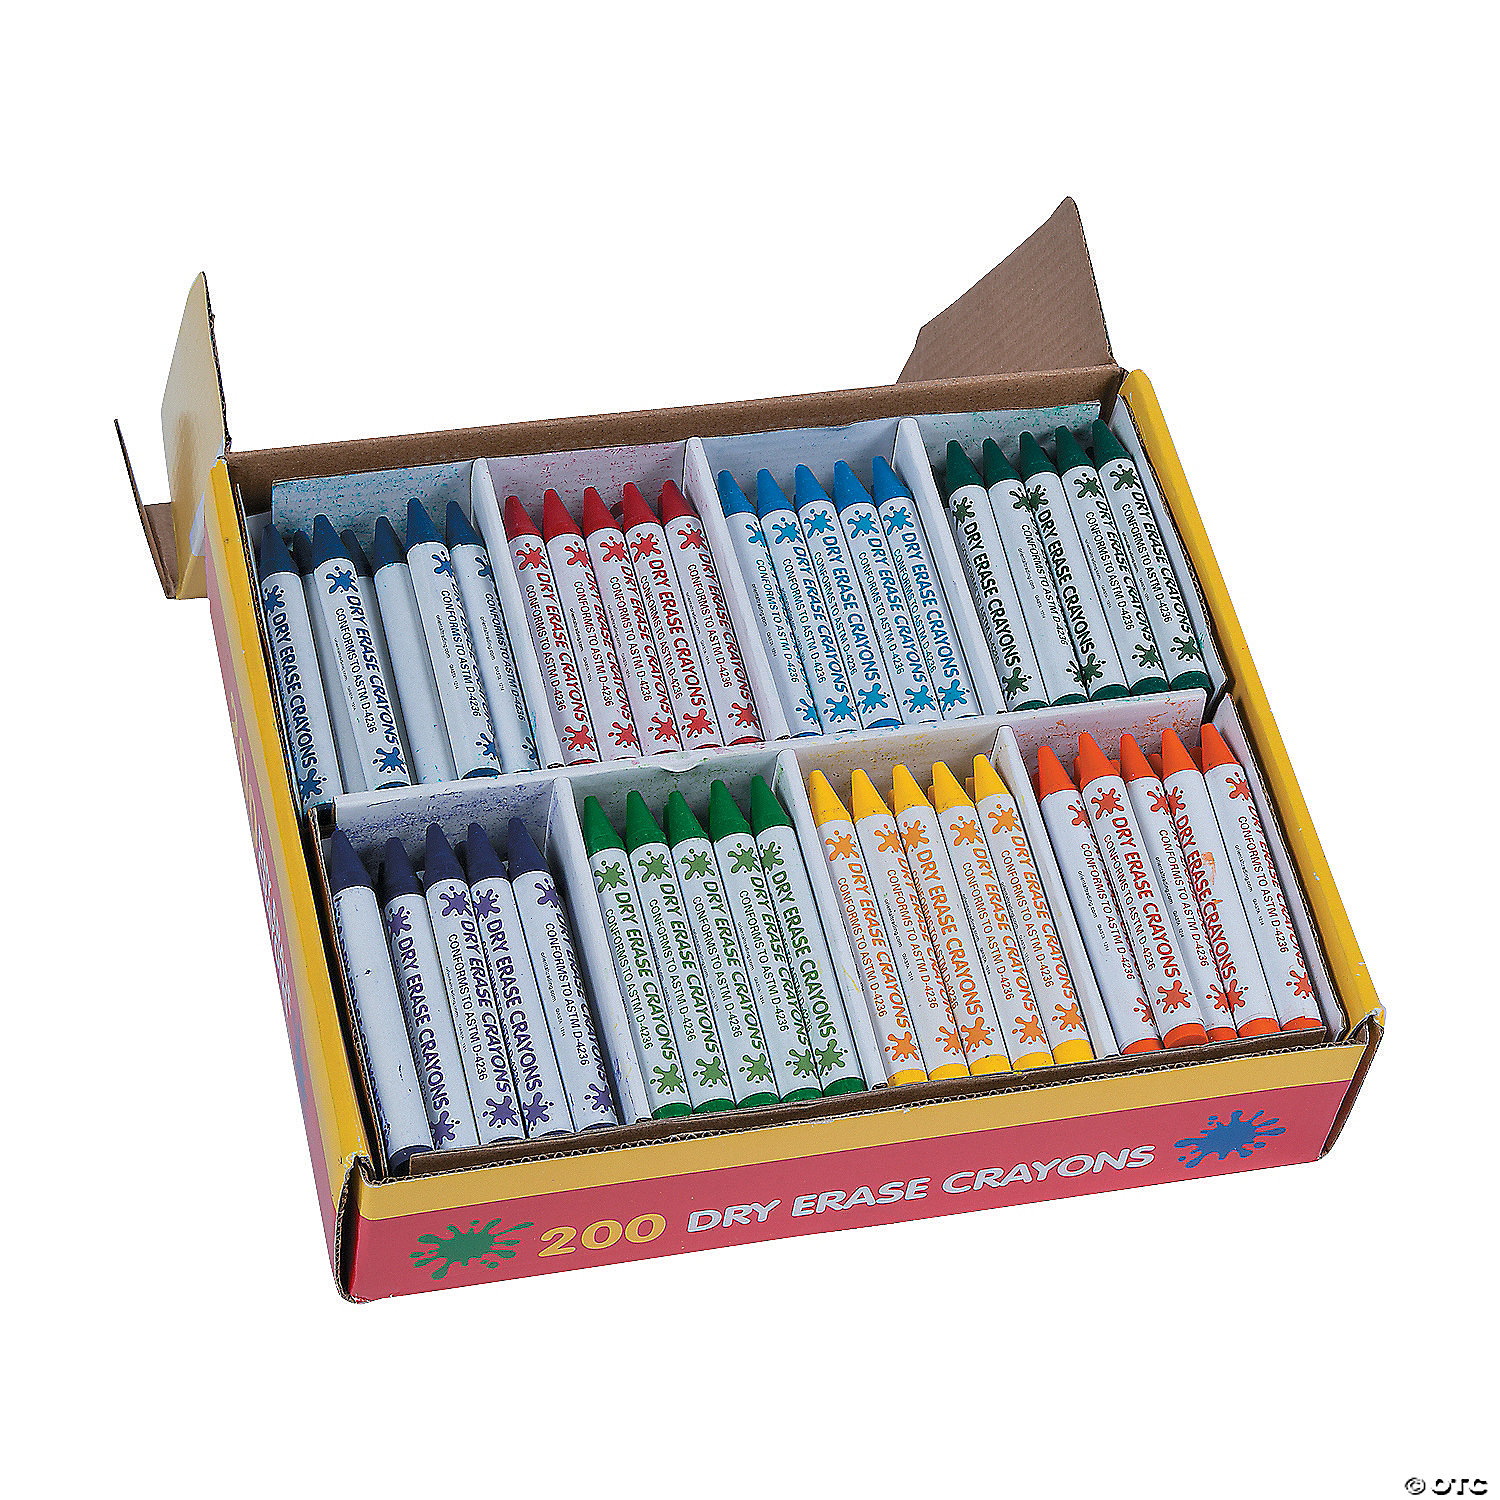 Colorations® Non-Roll Dry-Erase Crayon Classroom Value Pack - Set